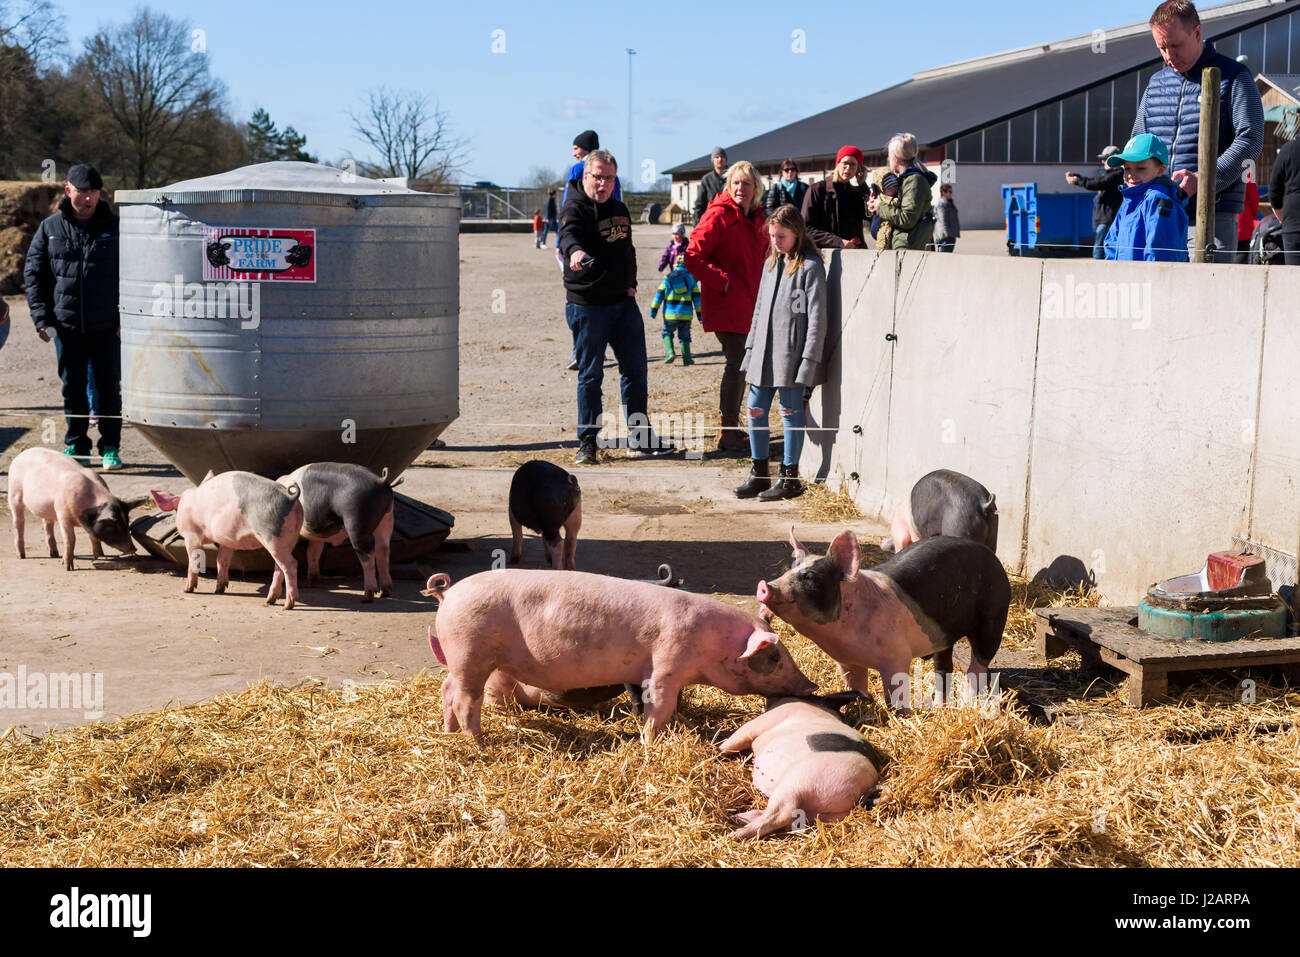 Brakne Hoby, Sweden - April 22, 2017: Documentary of small public farmers day. People looking and pointing at pigs living outdoors on farm. Stock Photo